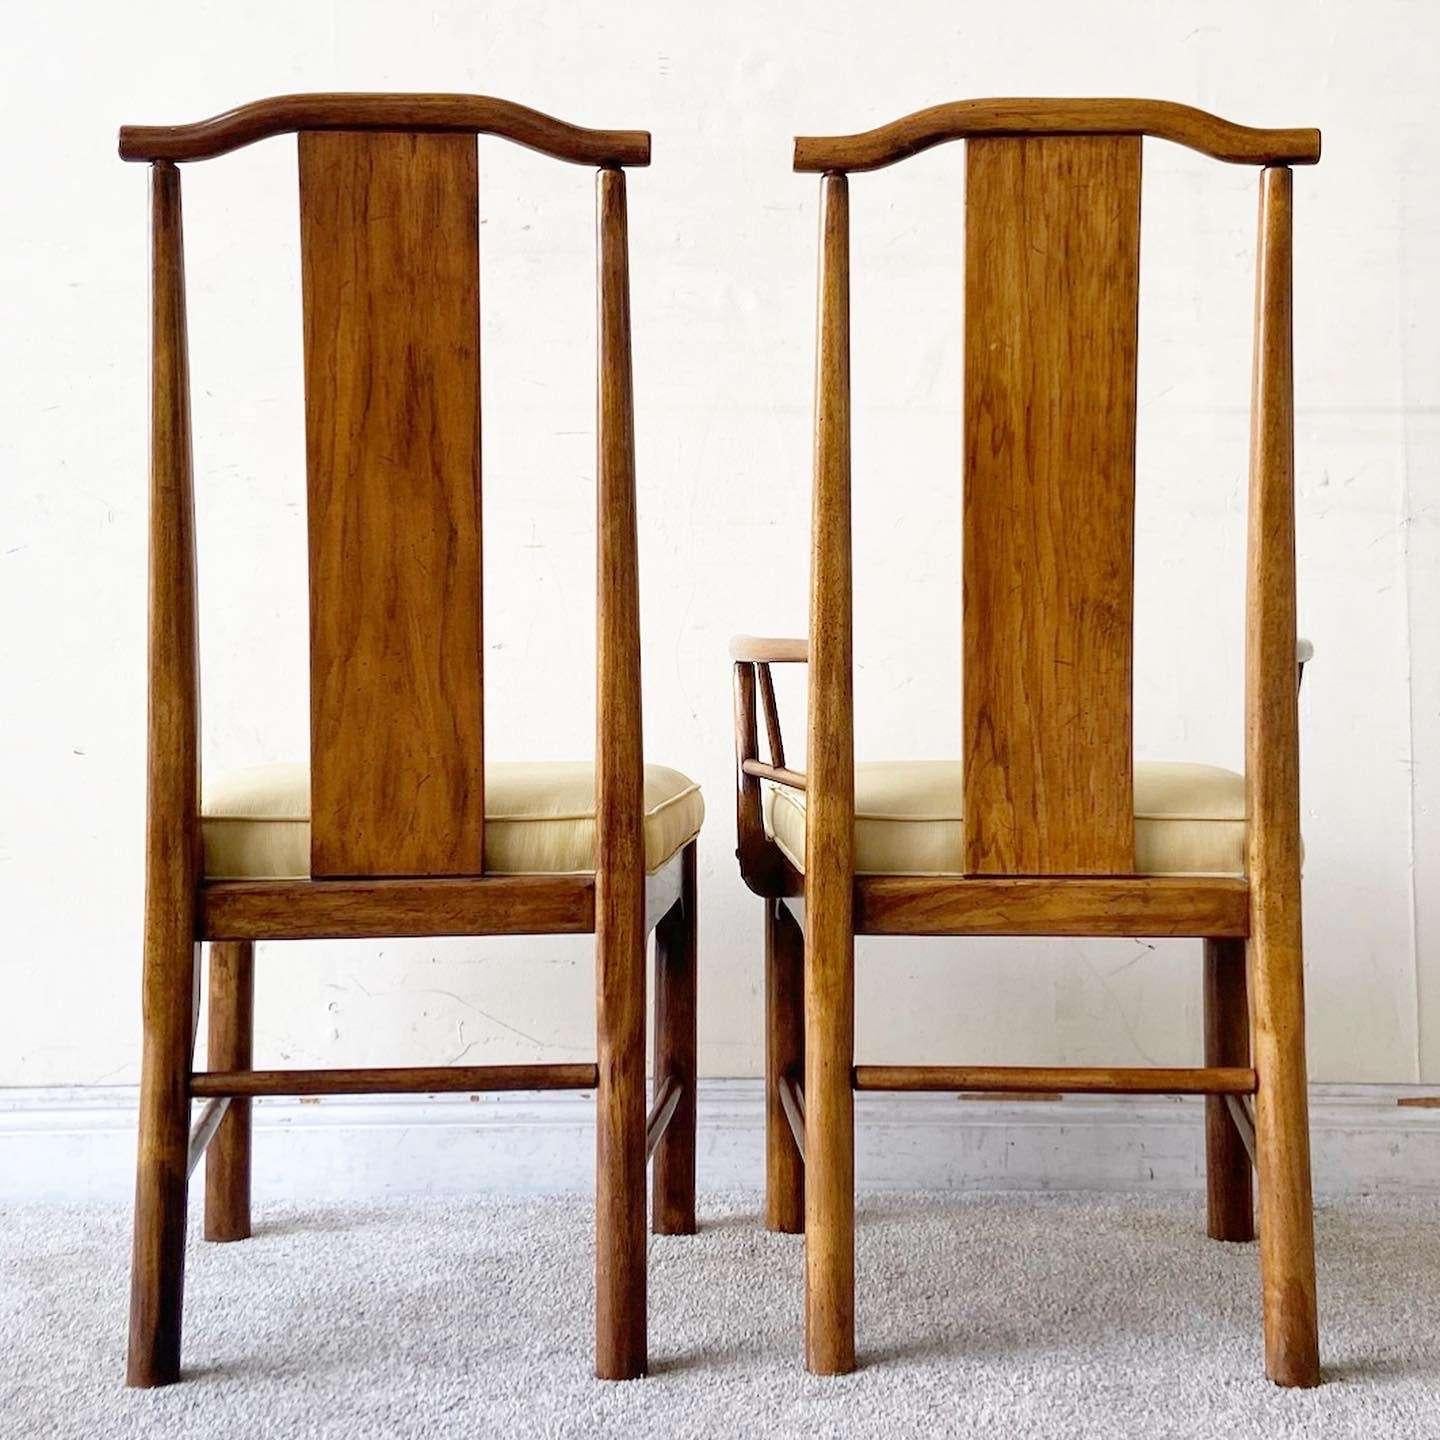 Vintage chinoiserie wooden dining chairs. The seat features two captains chairs and 4 side chairs with a light yellow fabric seat cushion.

Armchairs have a width of 22.5”

Seat height is 19.0 in